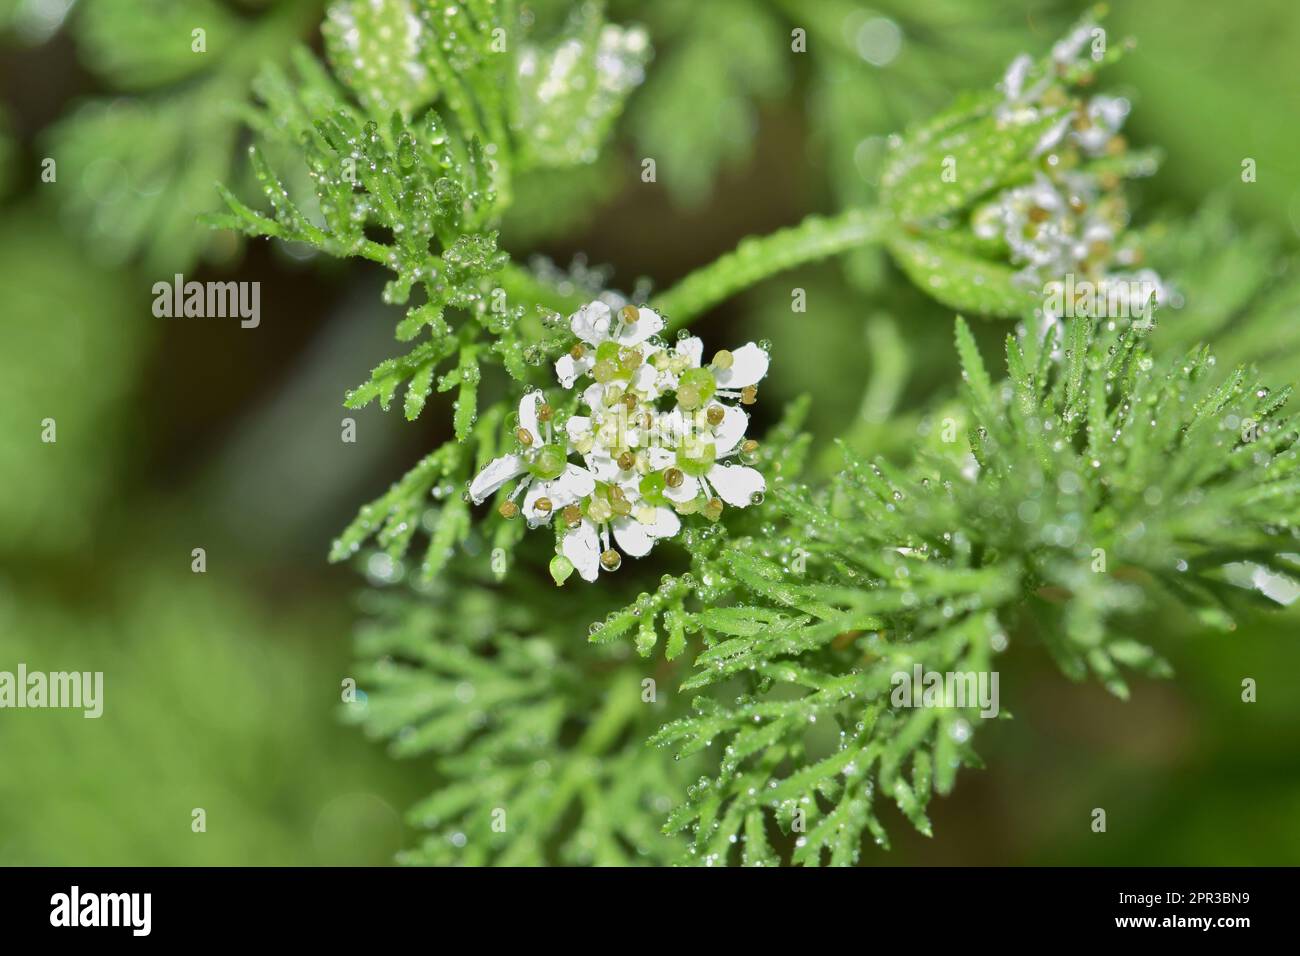 Shepherds Needle (Scandix pecten-veneris) plant flowers and leaves with water droplets. Invasive species native to Europe, but found globally. Stock Photo